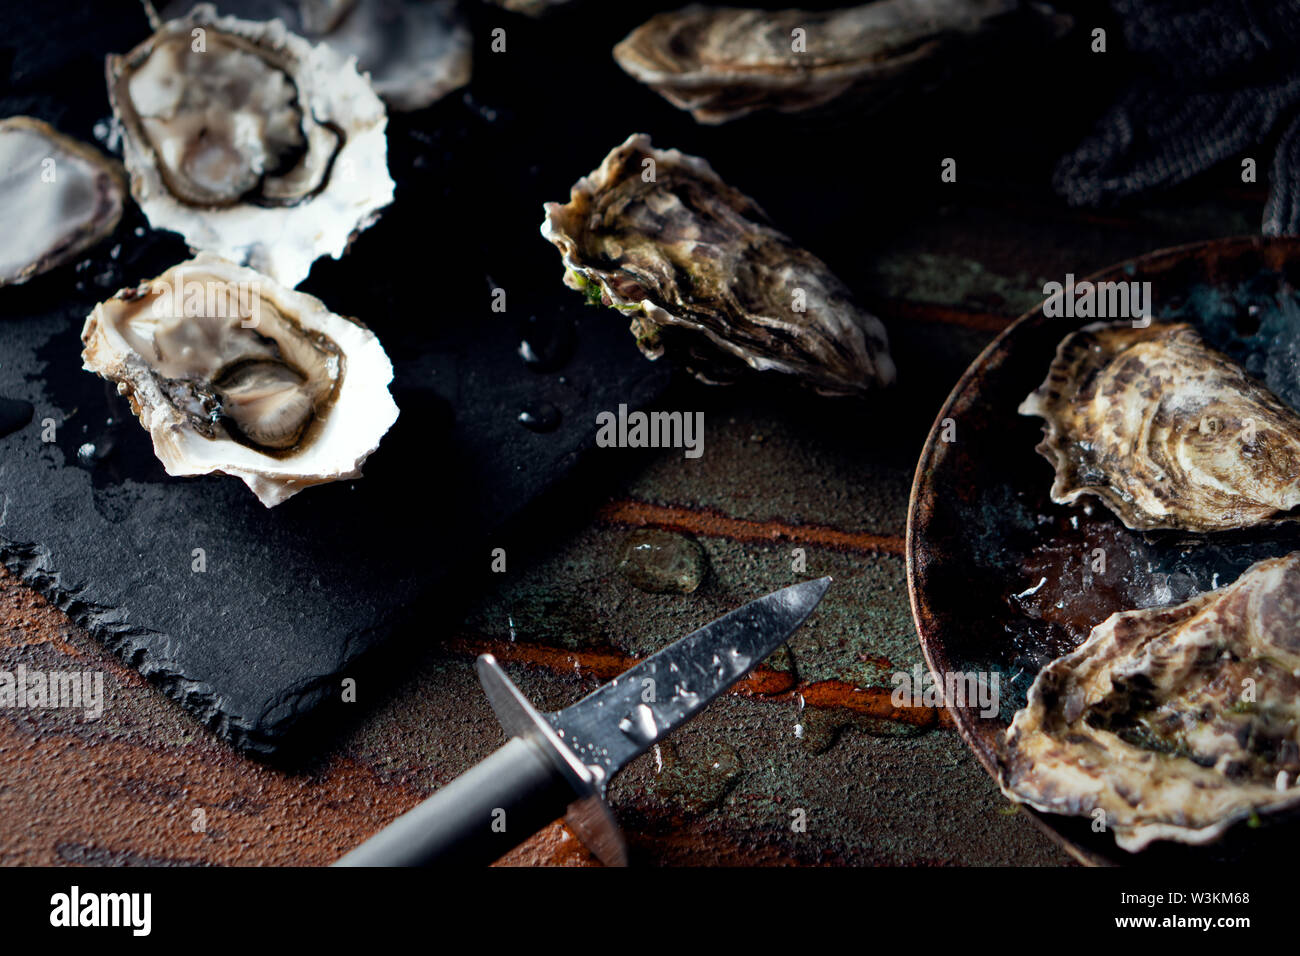 Opened fresh oysters on a dark background, a knife and water drops. Rostik style. Stock Photo